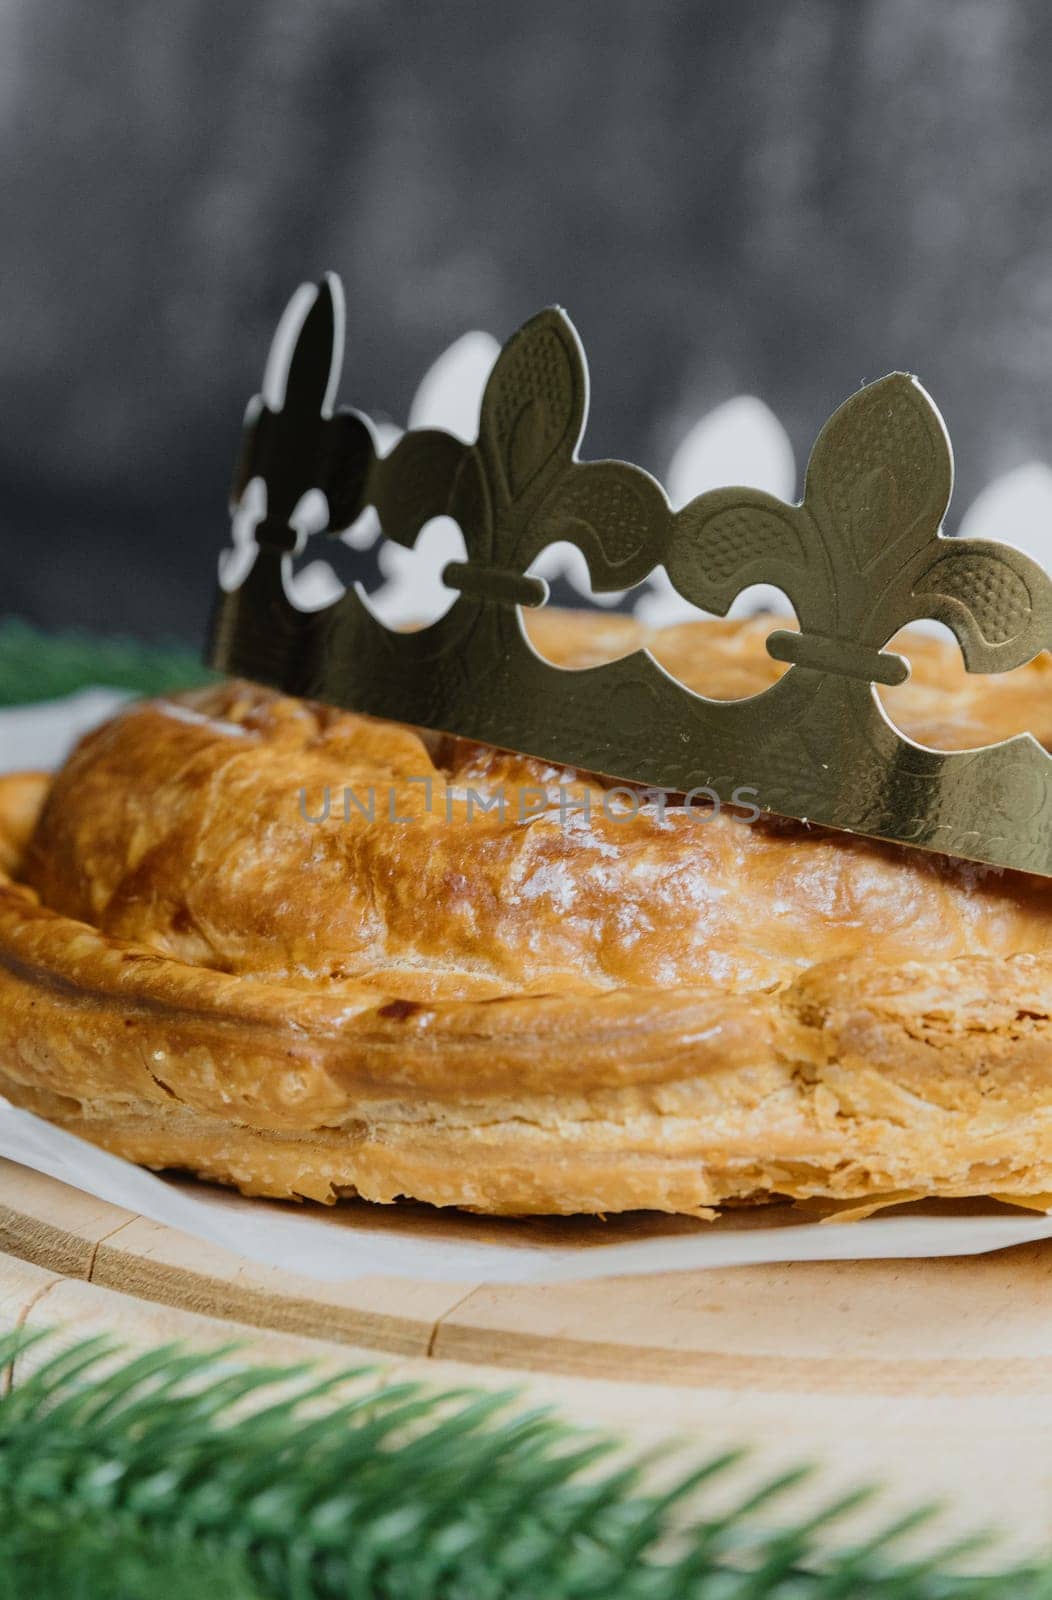 One whole freshly baked golden crown king galette on a round wooden cutting board with baking paper stands on the table with a blurred dark gray background, side view close up with depth of field.